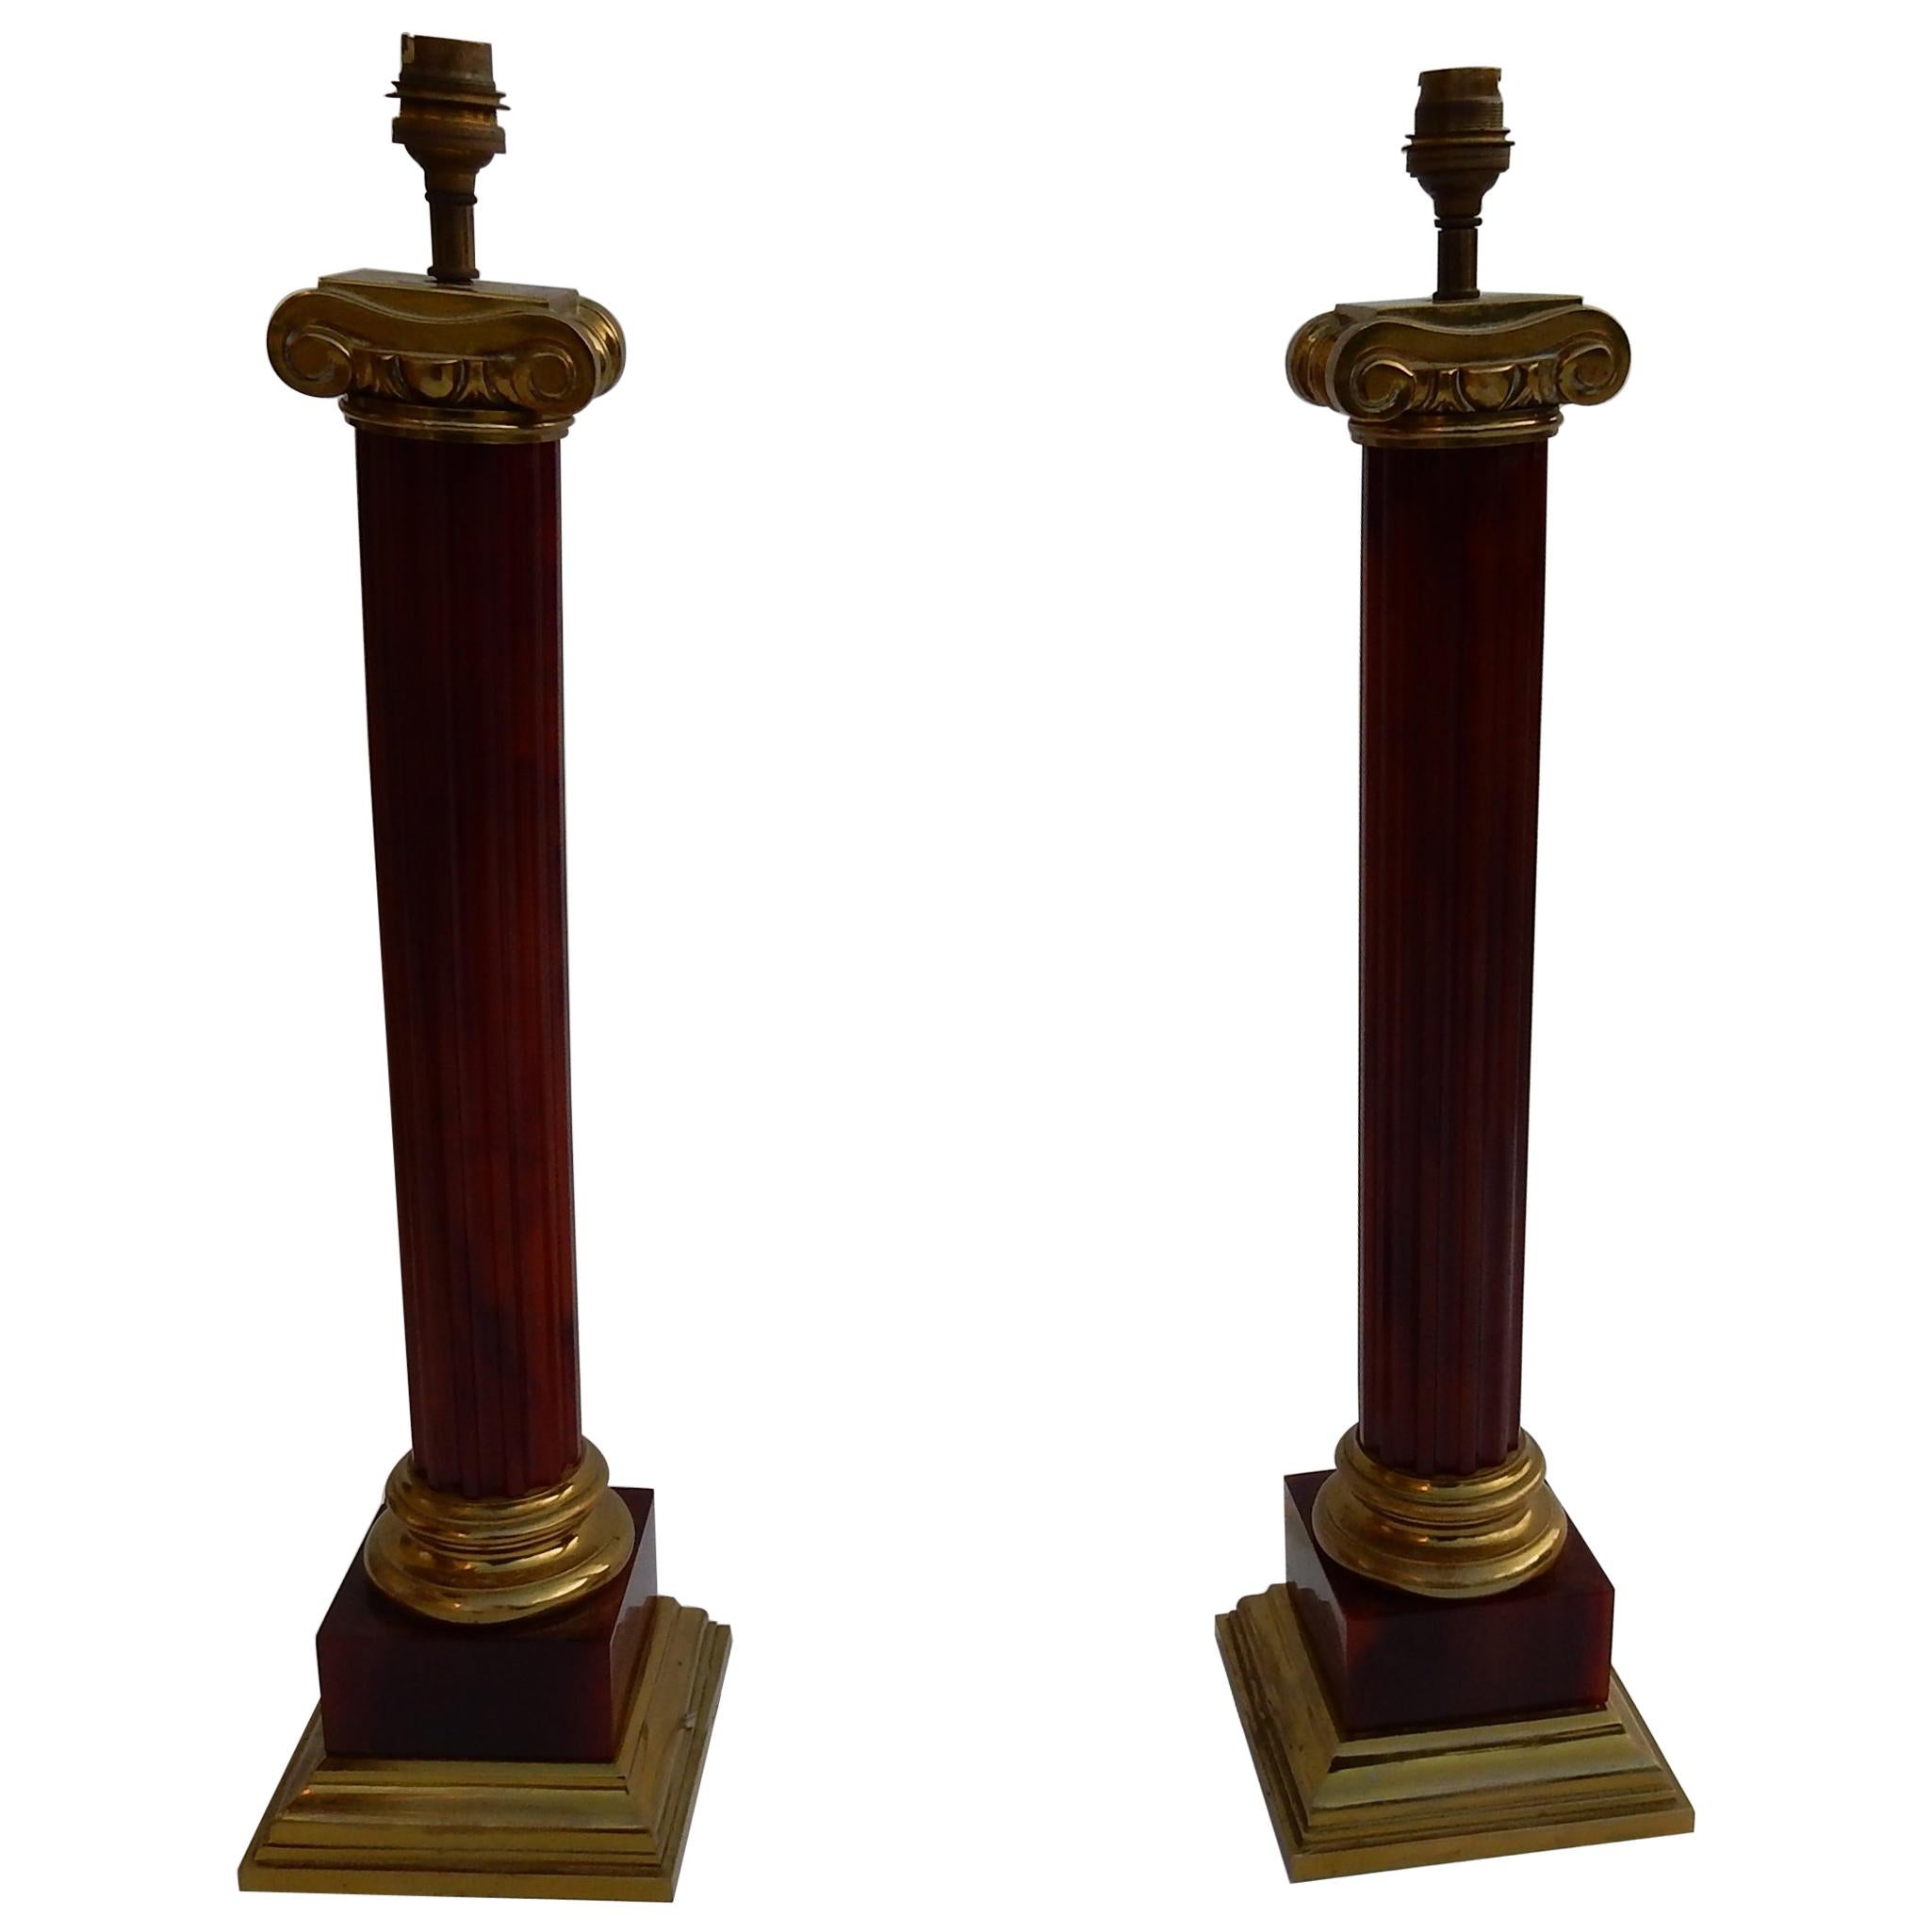 1950-1970 Pair of Maison Jansen Lamps, Gilt Bronze and Bakelite, Amber Color For Sale